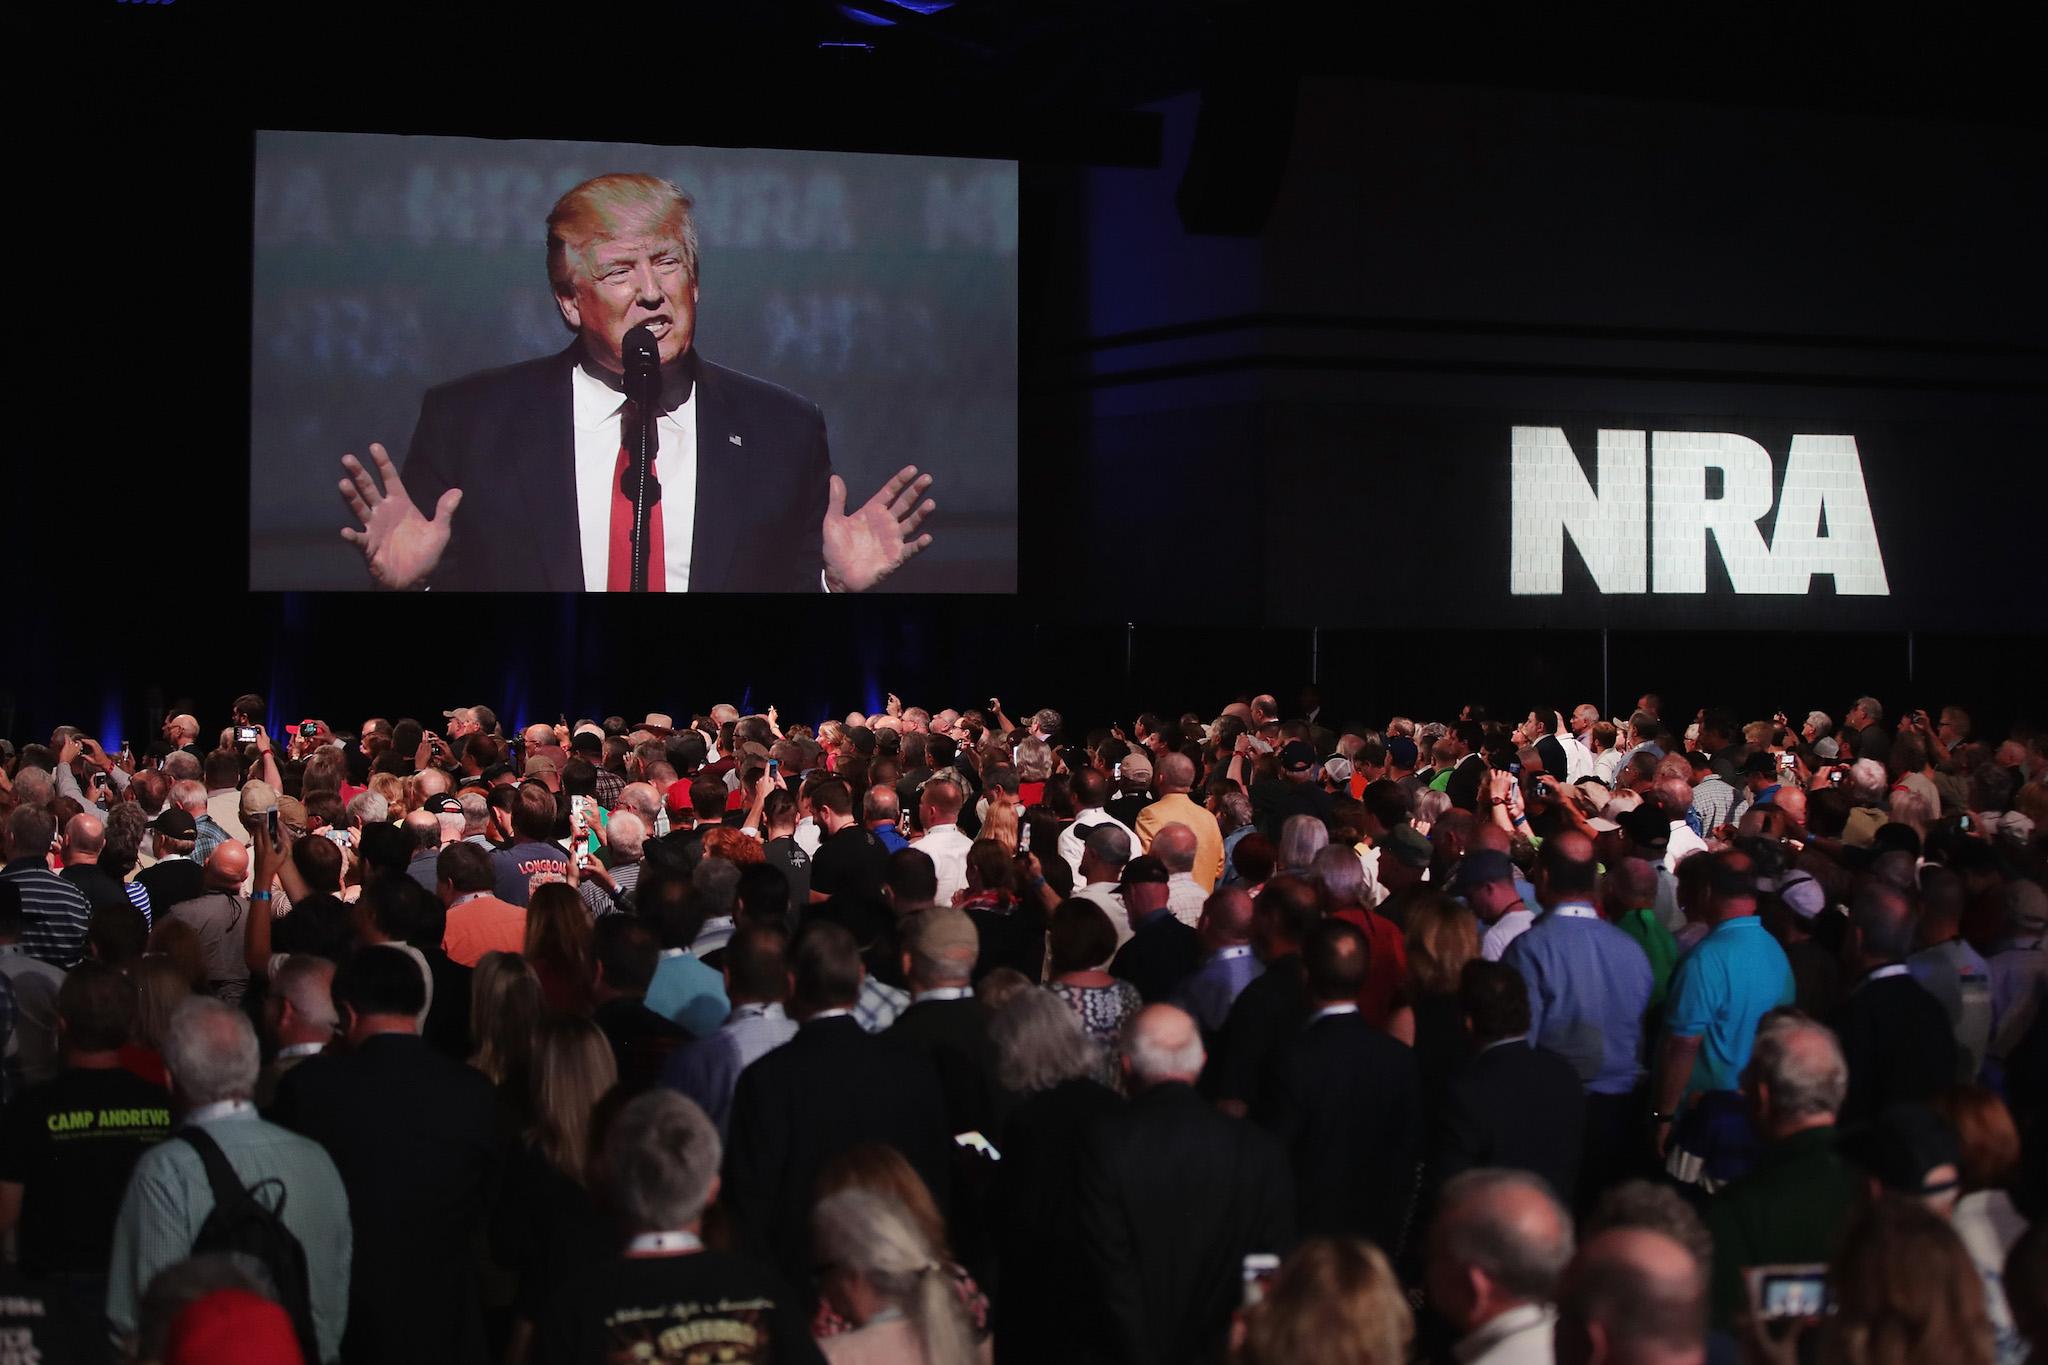 More than 24 hours after the worst mass shooting in US history, the NRA has not commented - although Donald Trump has